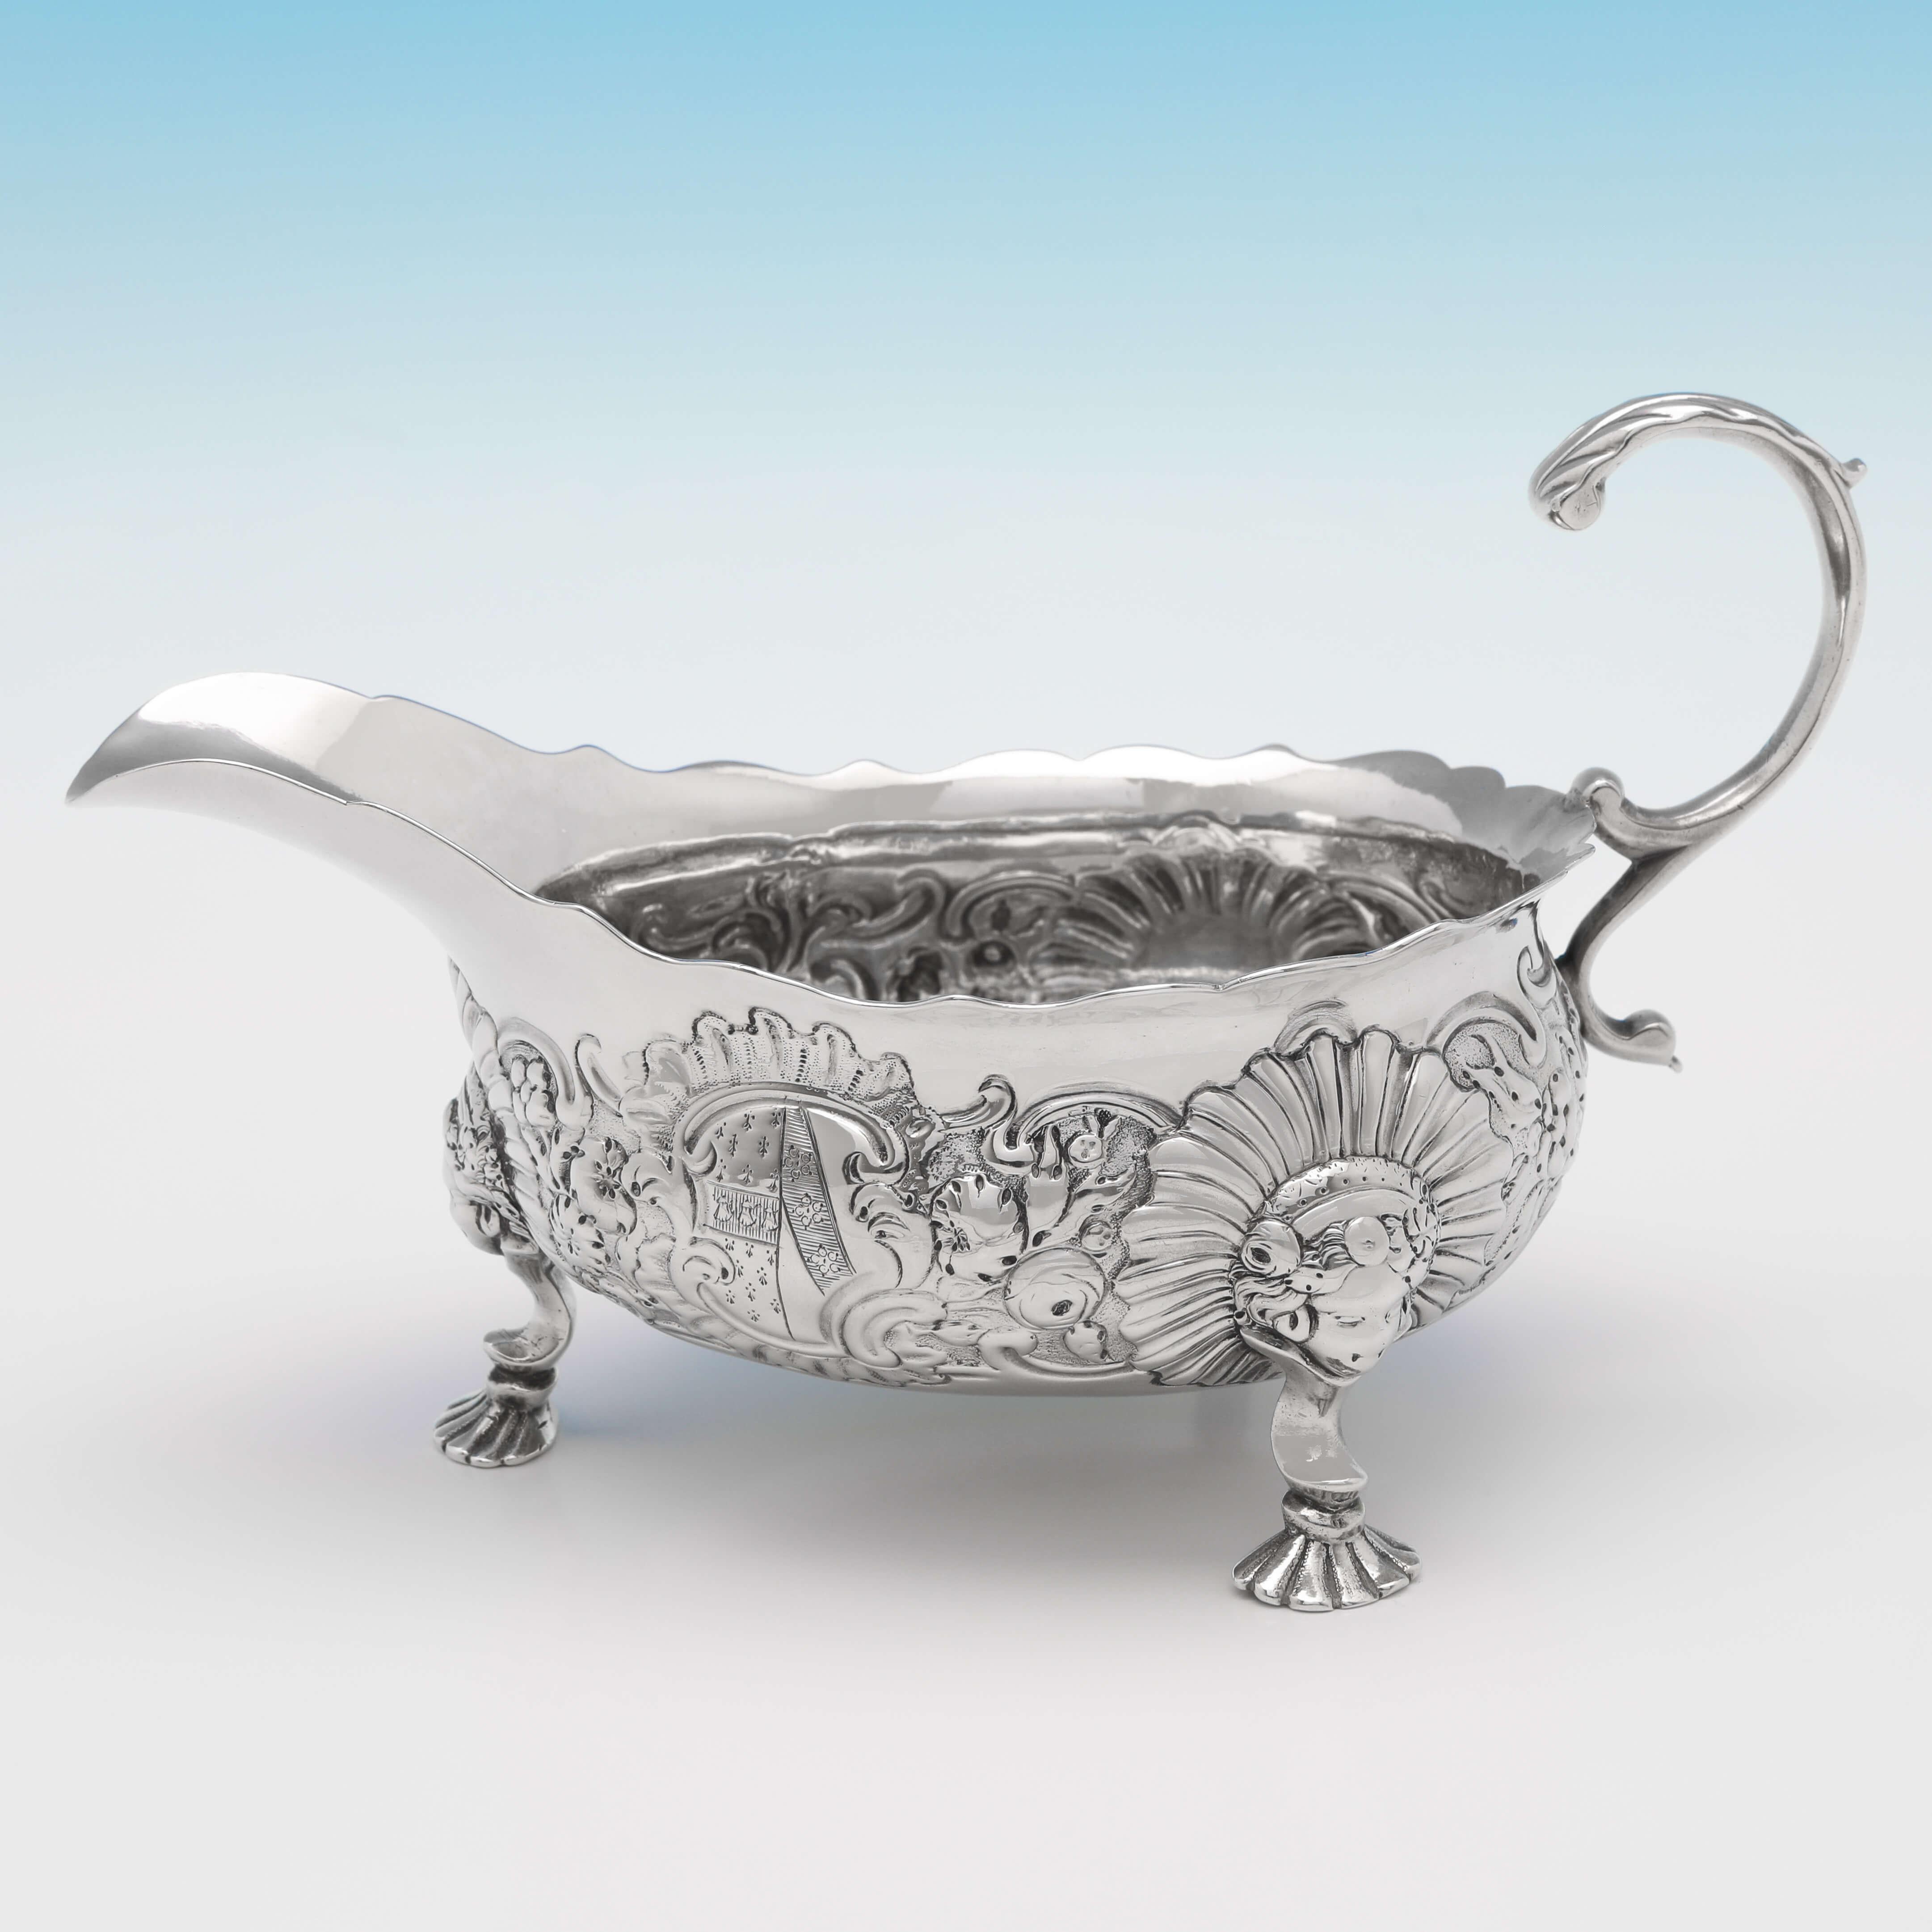 Hallmarked in London in 1746 by Richard Kersill, this striking pair of George II, antique sterling silver sauce boats, feature Rococo chasing to the bodies, three feet with shell and mask decoration, and acanthus detailed flying C-scroll handles.